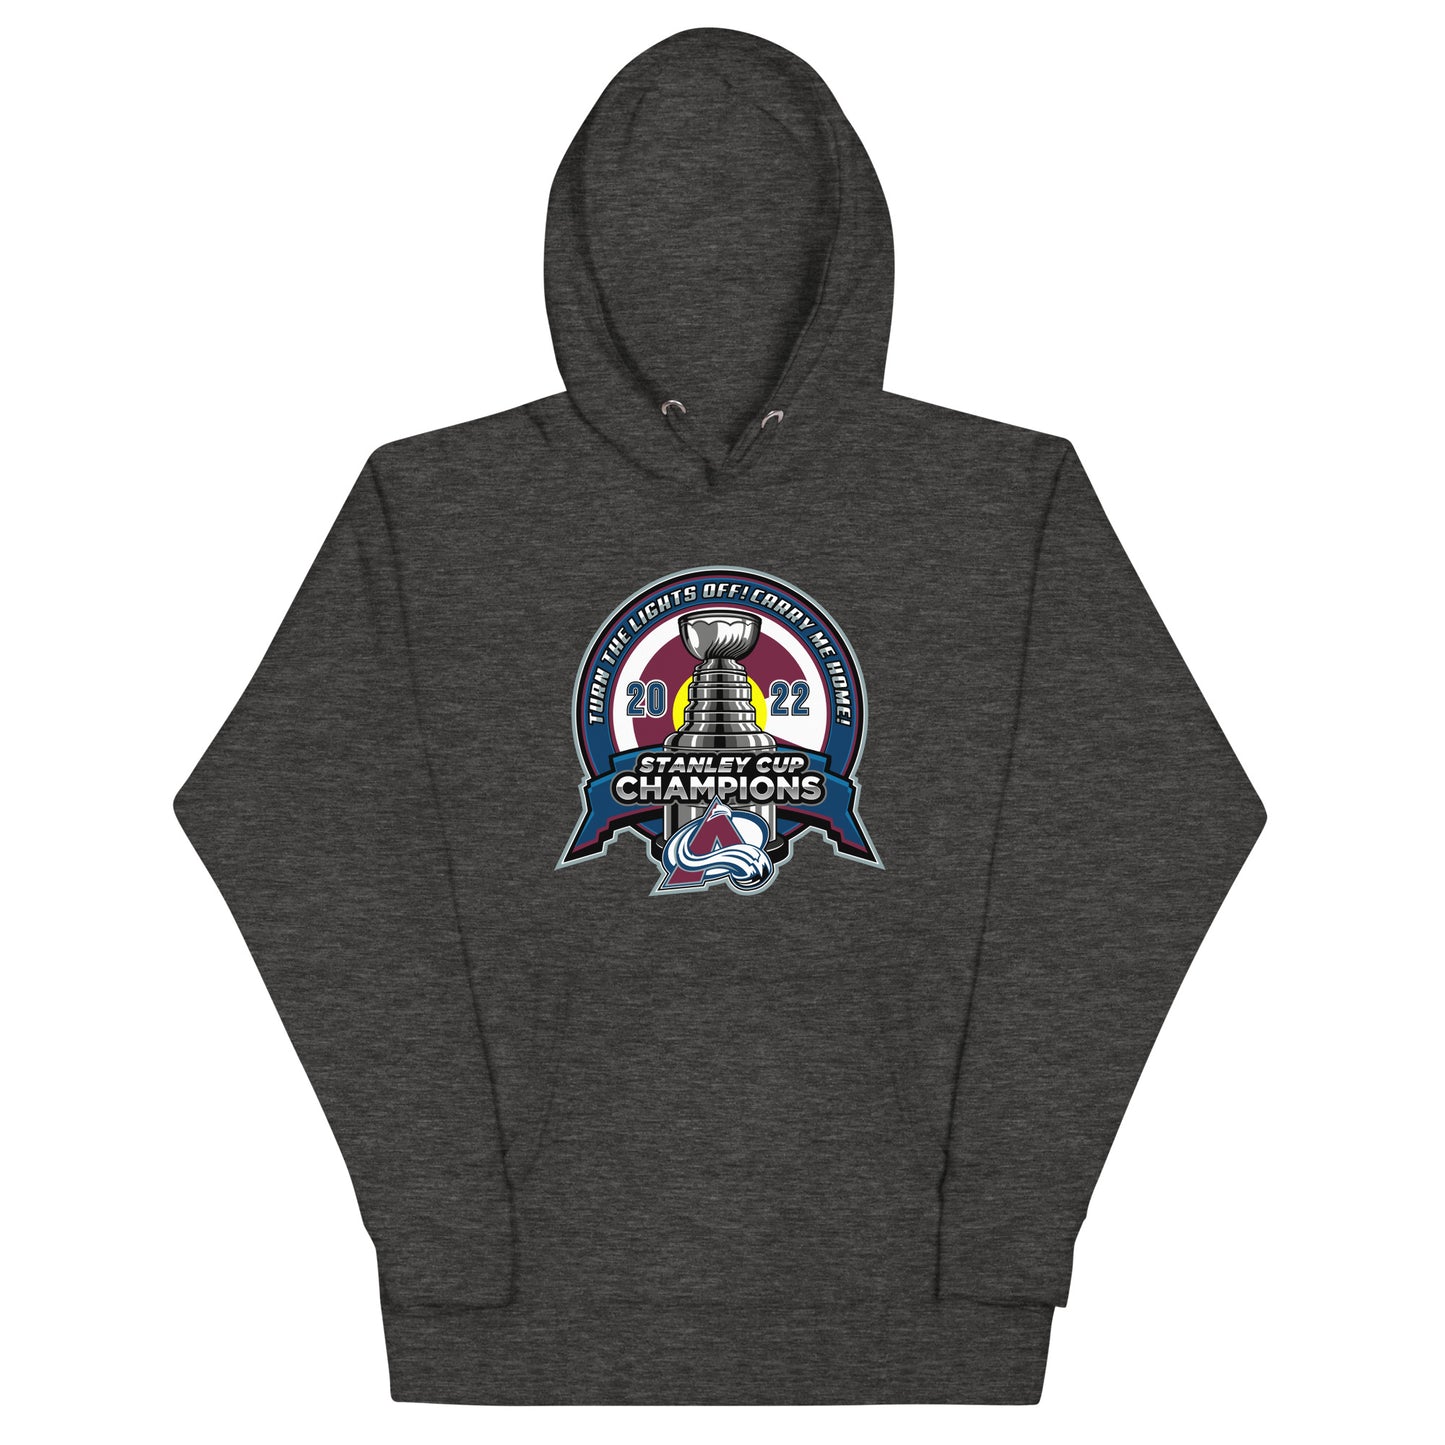 Turn The Lights Off, Carry Me Home Champs Hoodie